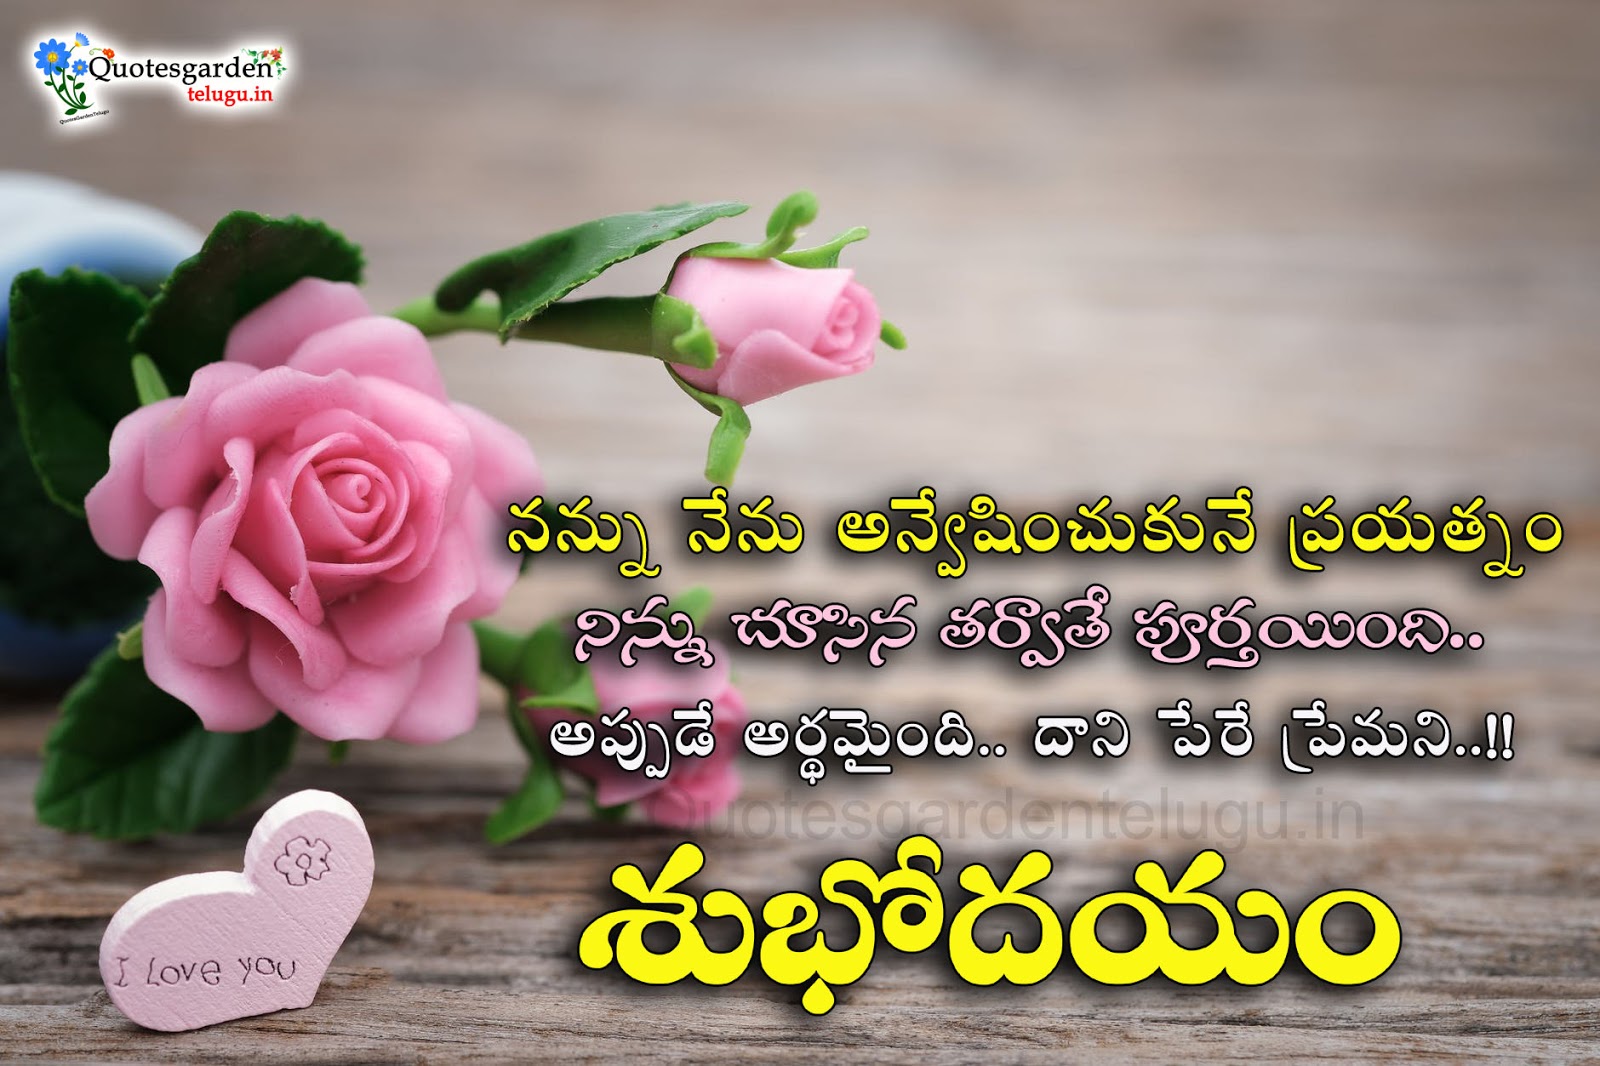 Latest new good morning love quotes messages wallpapers in telugu ...